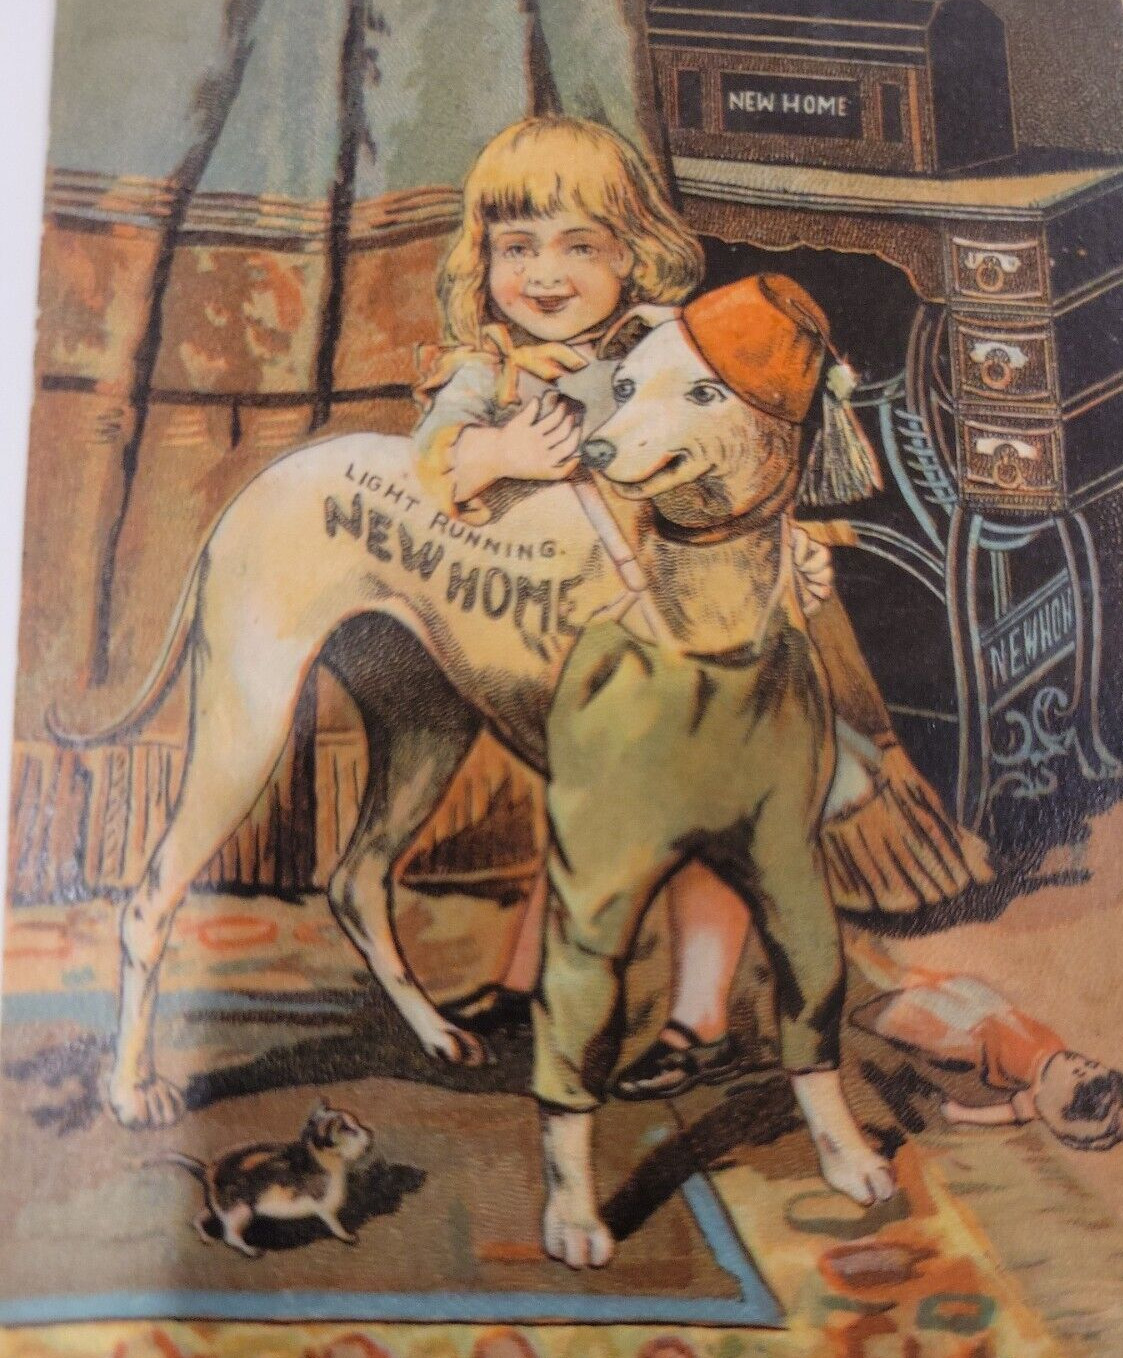 ANTIQUE 1865 Trade Card New Home Sewing Machine Greyhound shriner hat Girl Kitty